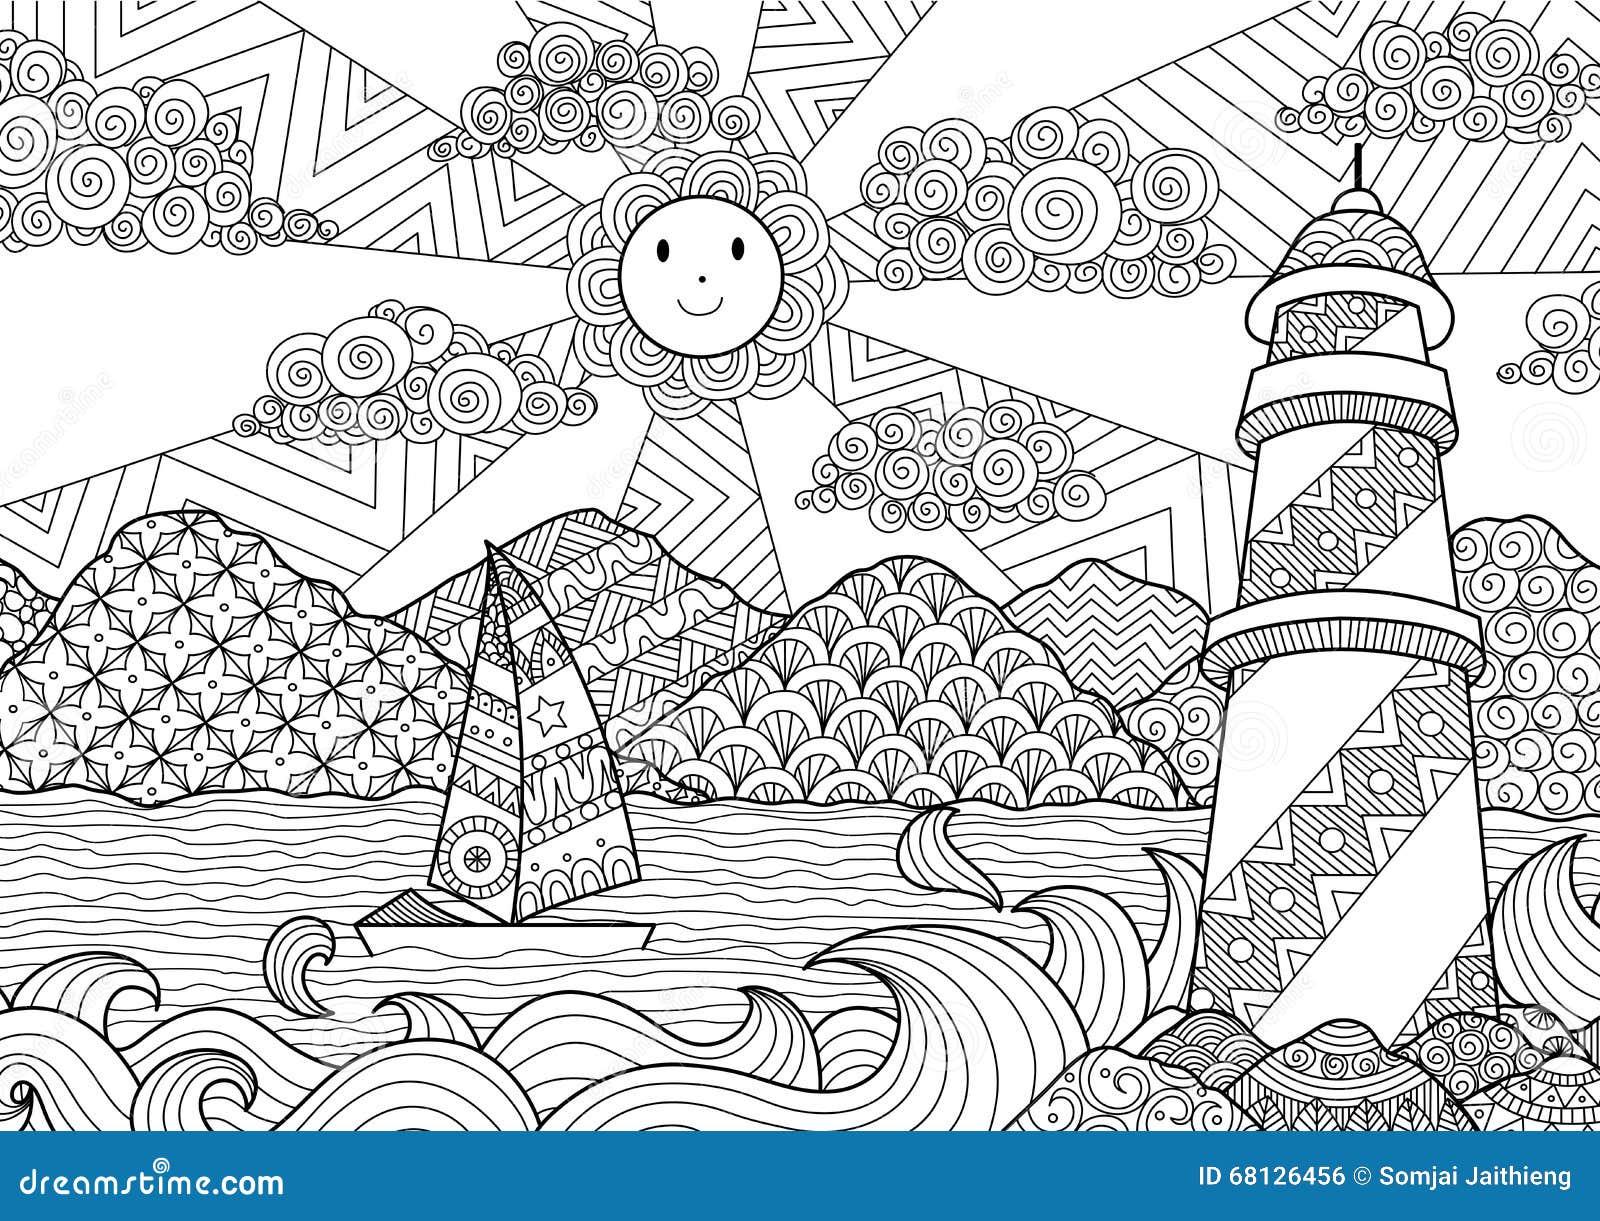 Coloring Book Stock Illustrations – 21,21 Coloring Book Stock ...